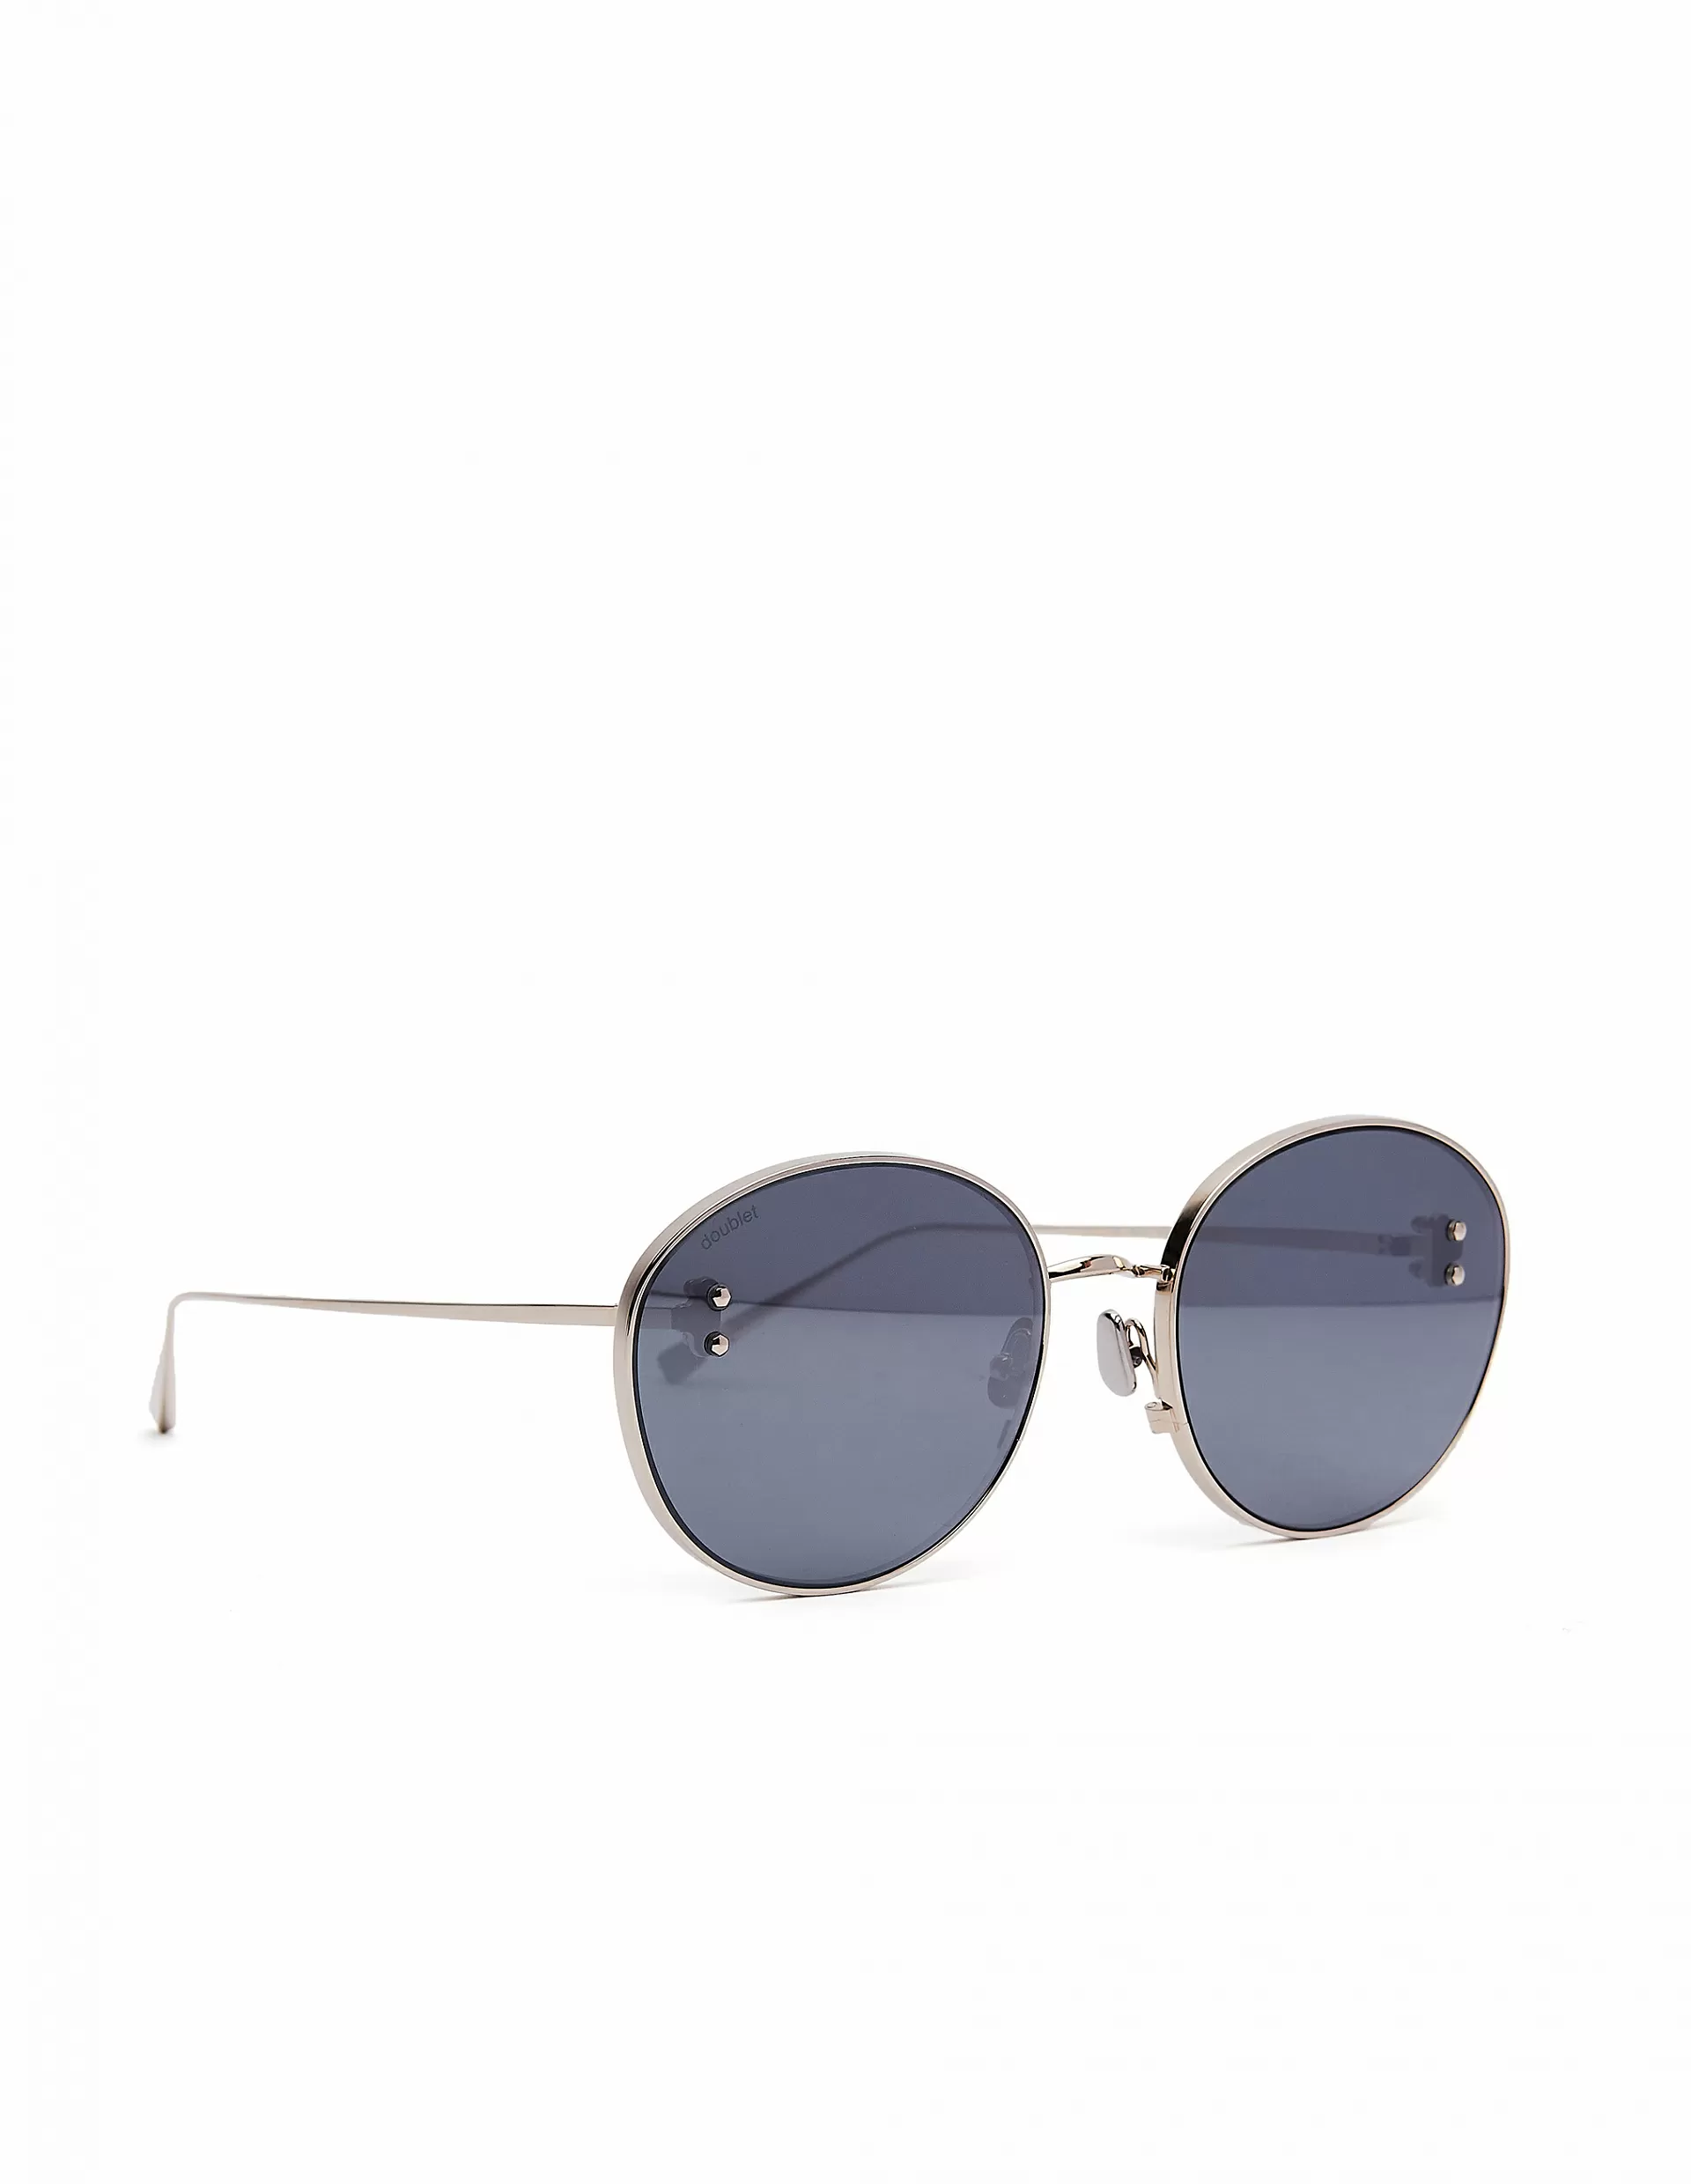 DOUBLET GREY ROUND SUNGLASSES,DB003-GOLD-GRY